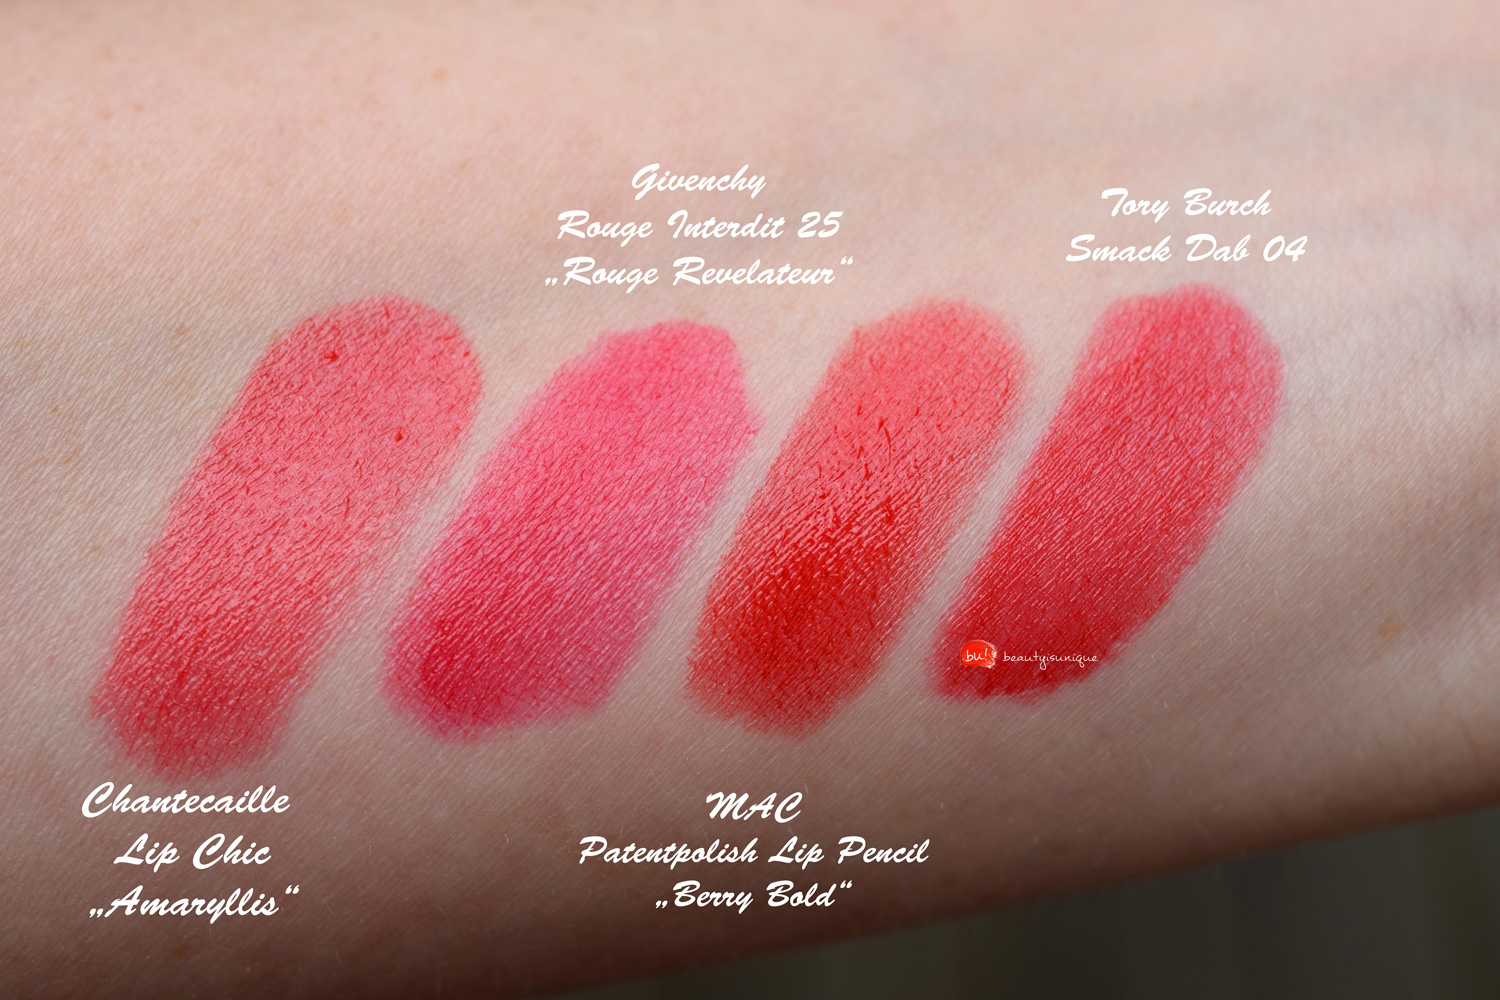 Givenchy-marble-lipstick-swatches